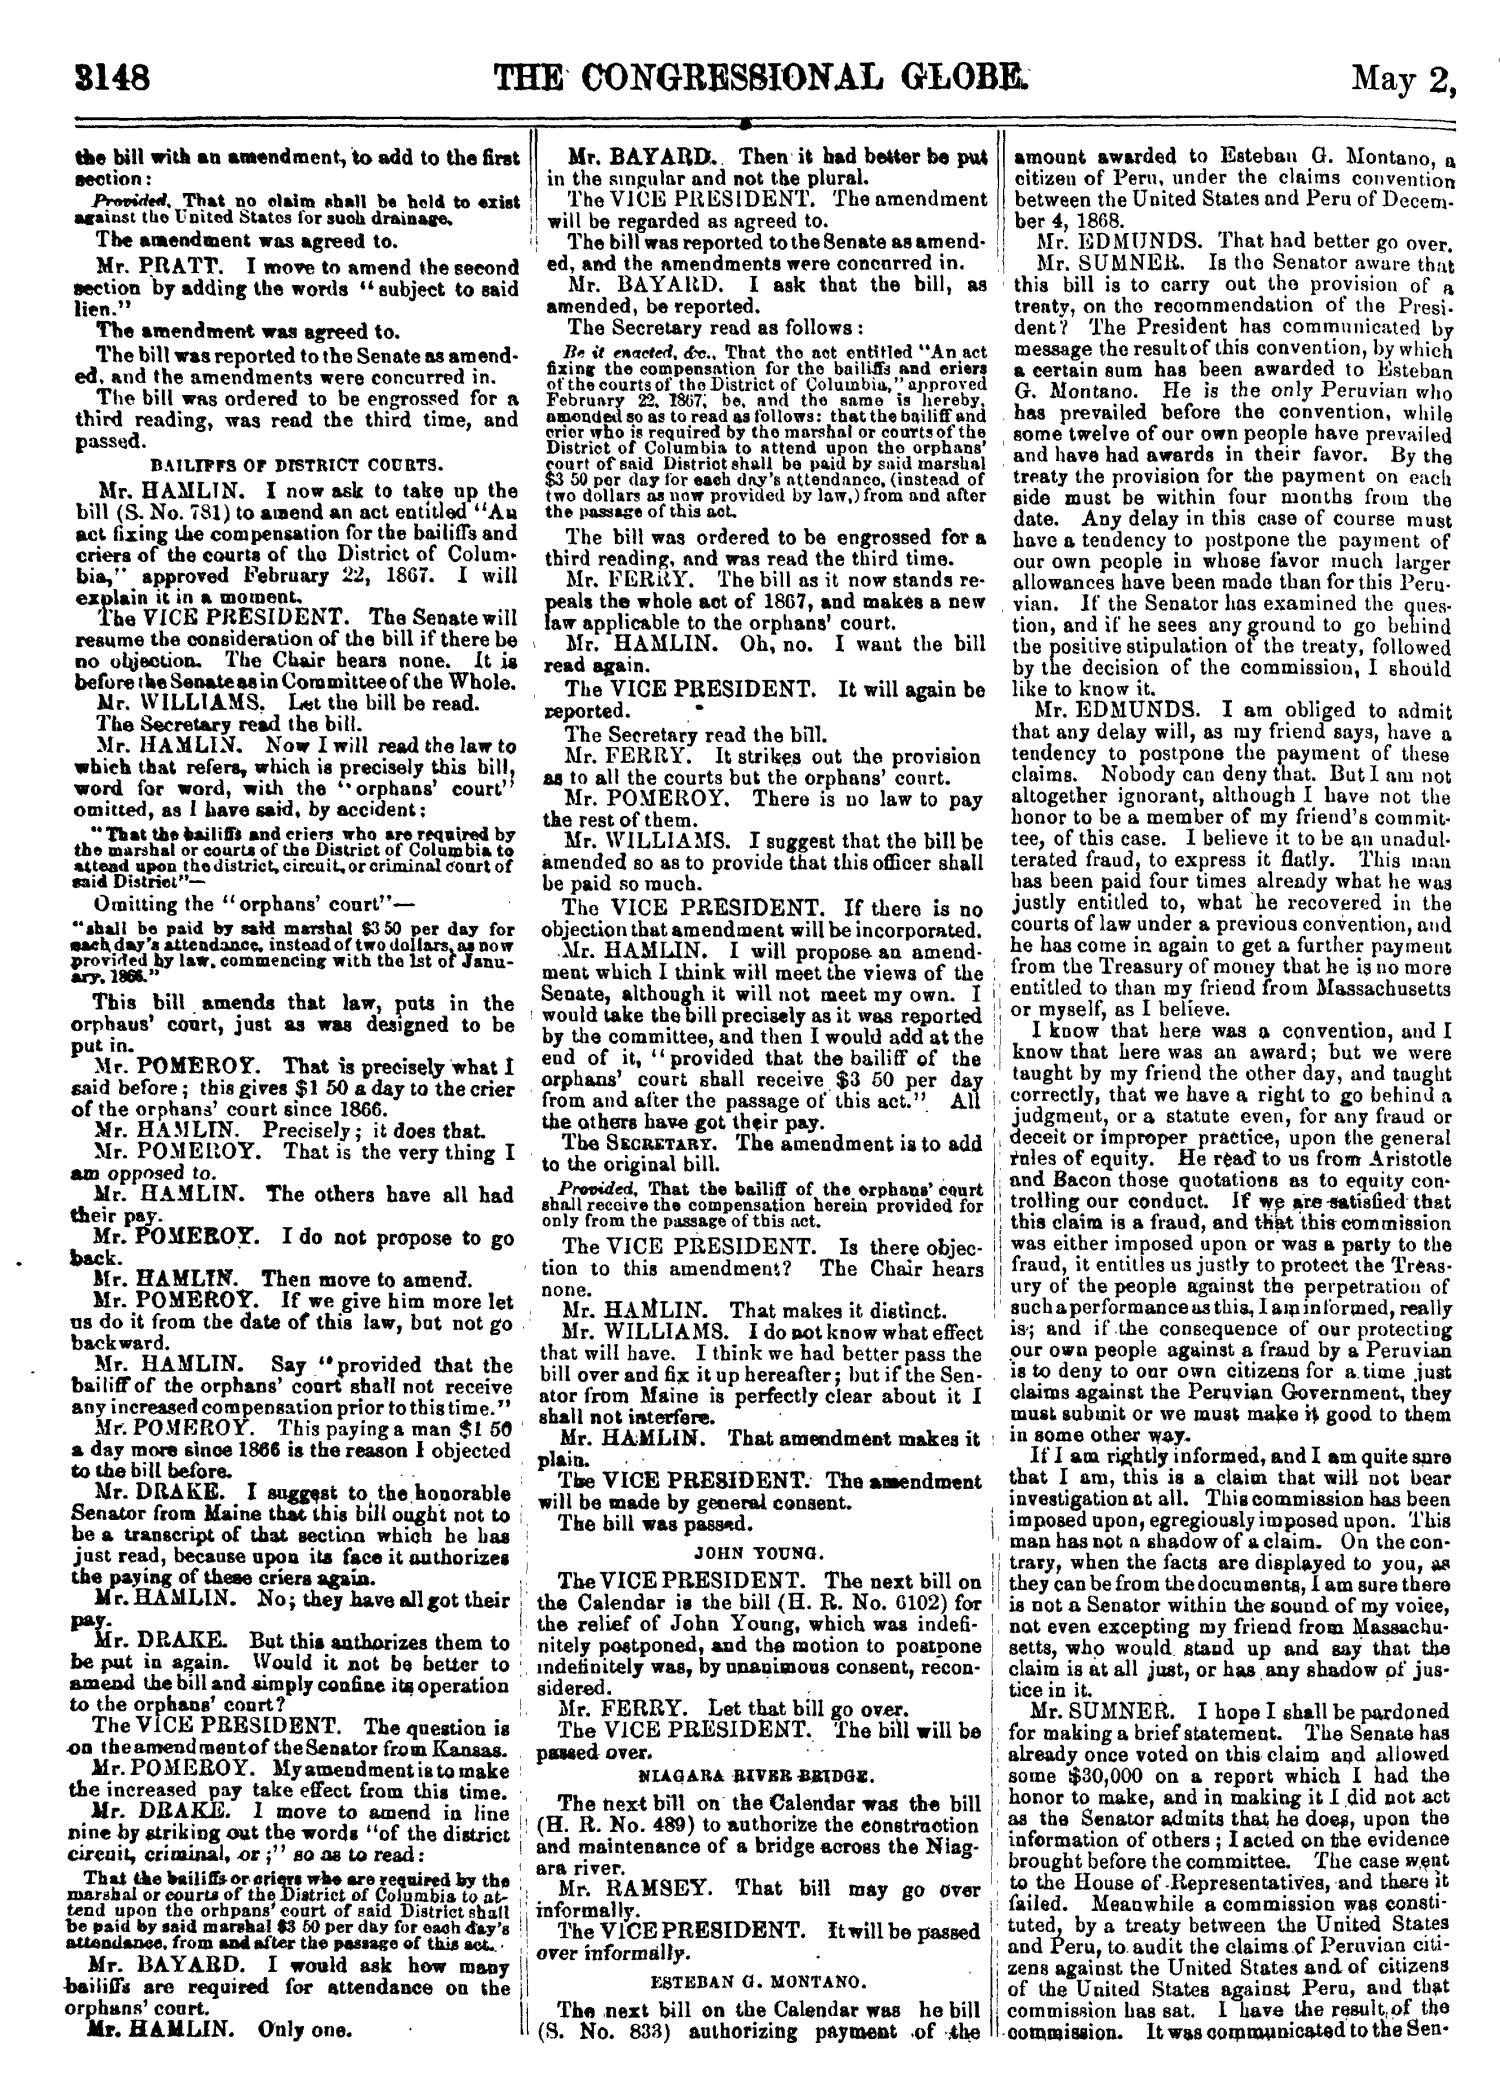 The Congressional Globe: Containing the Debates and Proceedings of the Second Session Forty-First Congress; Together with an Appendix, Embracing the Laws Passed at that Session
                                                
                                                    3148
                                                